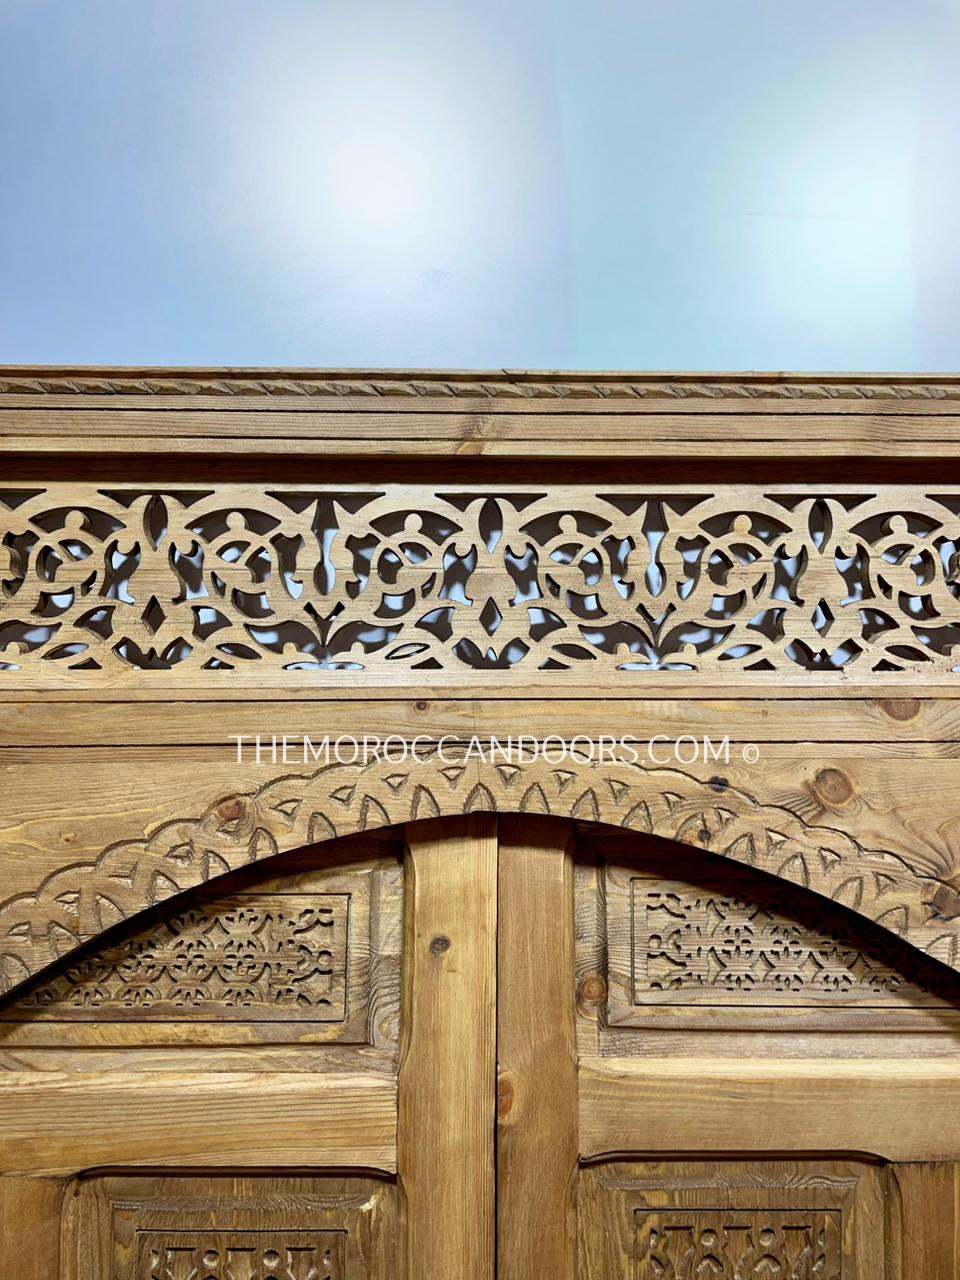 Hand-carved masterpiece reflecting Moroccan authenticity